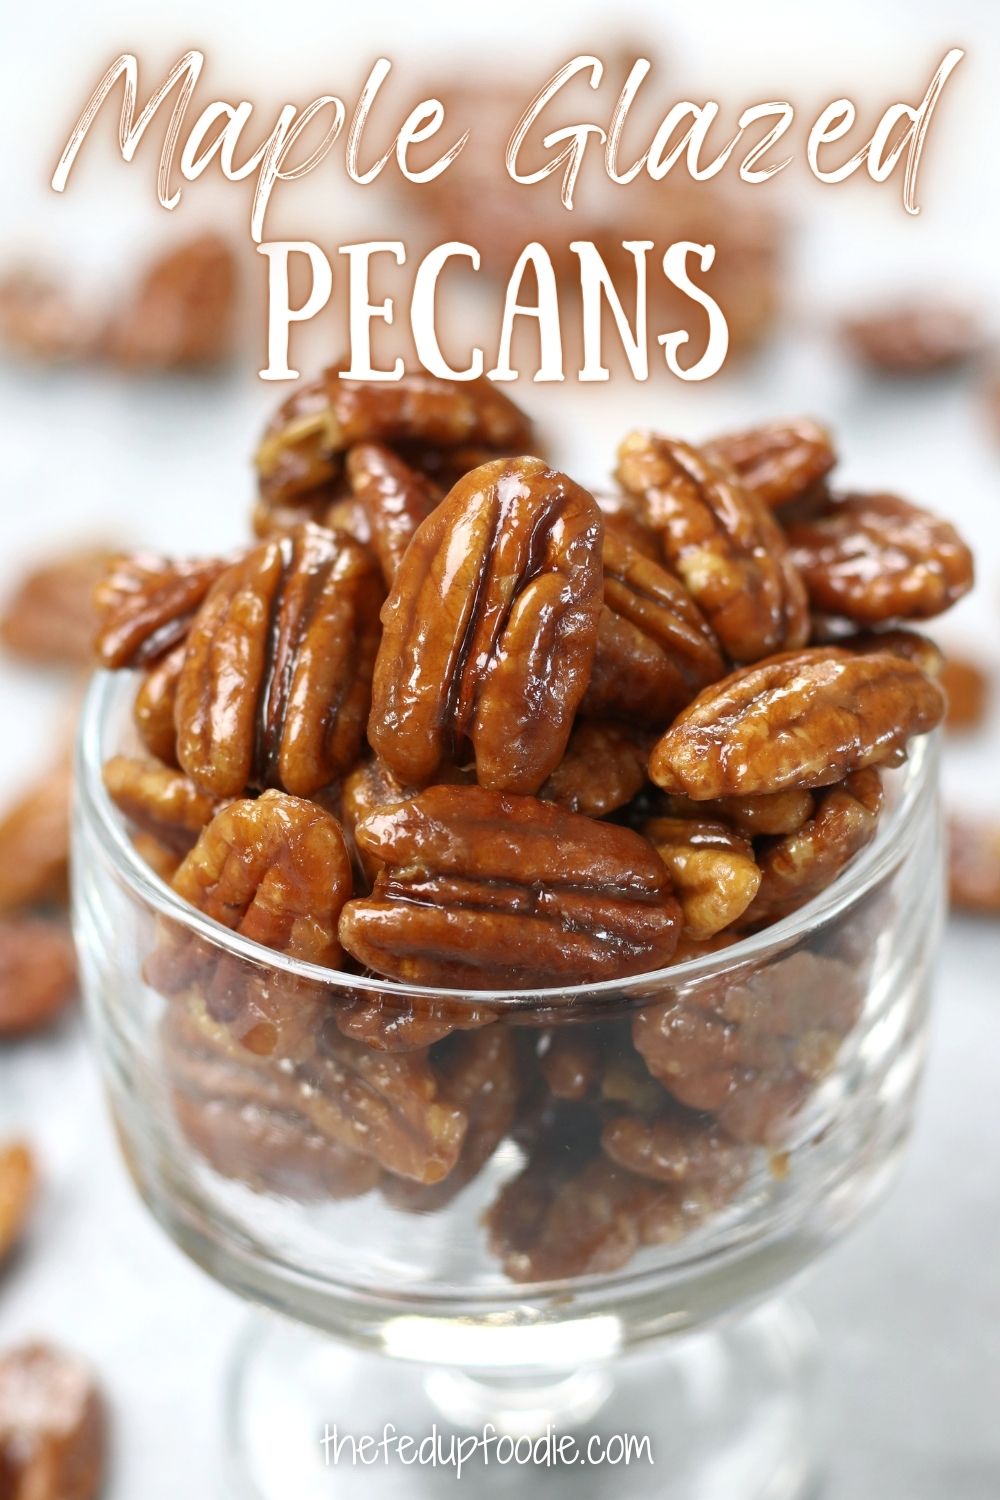 Maple Glazed Pecans recipe  uses only 4 ingredients and comes together in under 10 minutes. These nuts are delicious as a snack, on a charcuterie board, on salads, etc. A simple and healthy homemade treat that feels very decadent.  #MapleGlazedPecansRecipe #MapleGlazedPecansHealthy #GlazedPecansRecipe #CandiedPecansEasy #EasyHomemadeCandiedPecans #CaramelizedPecans 